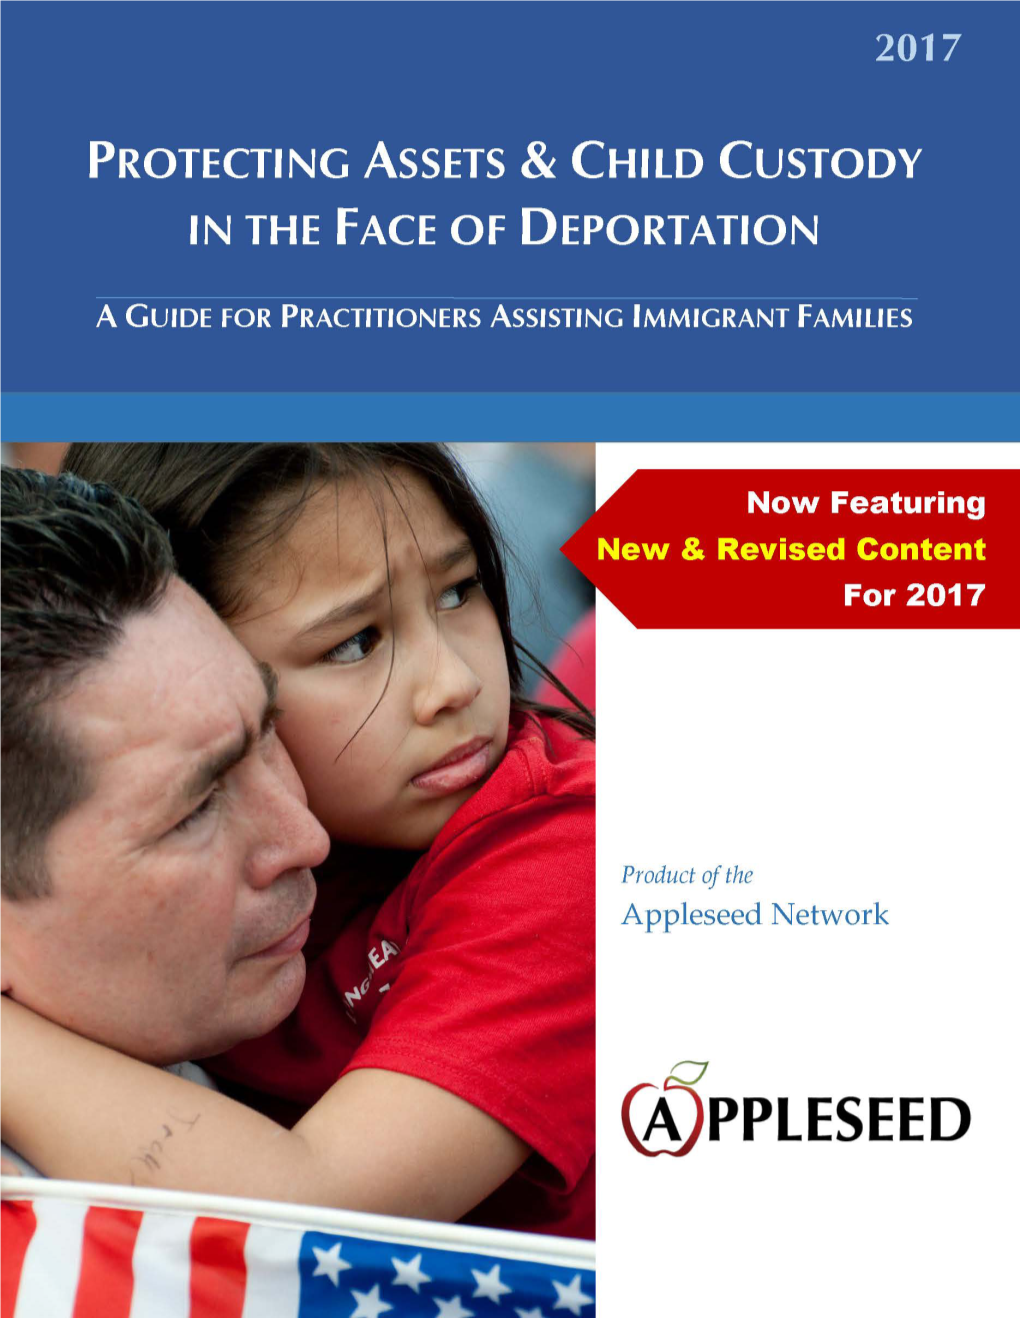 Protecting Assets & Child Custody in the Face of Deportation (2017)